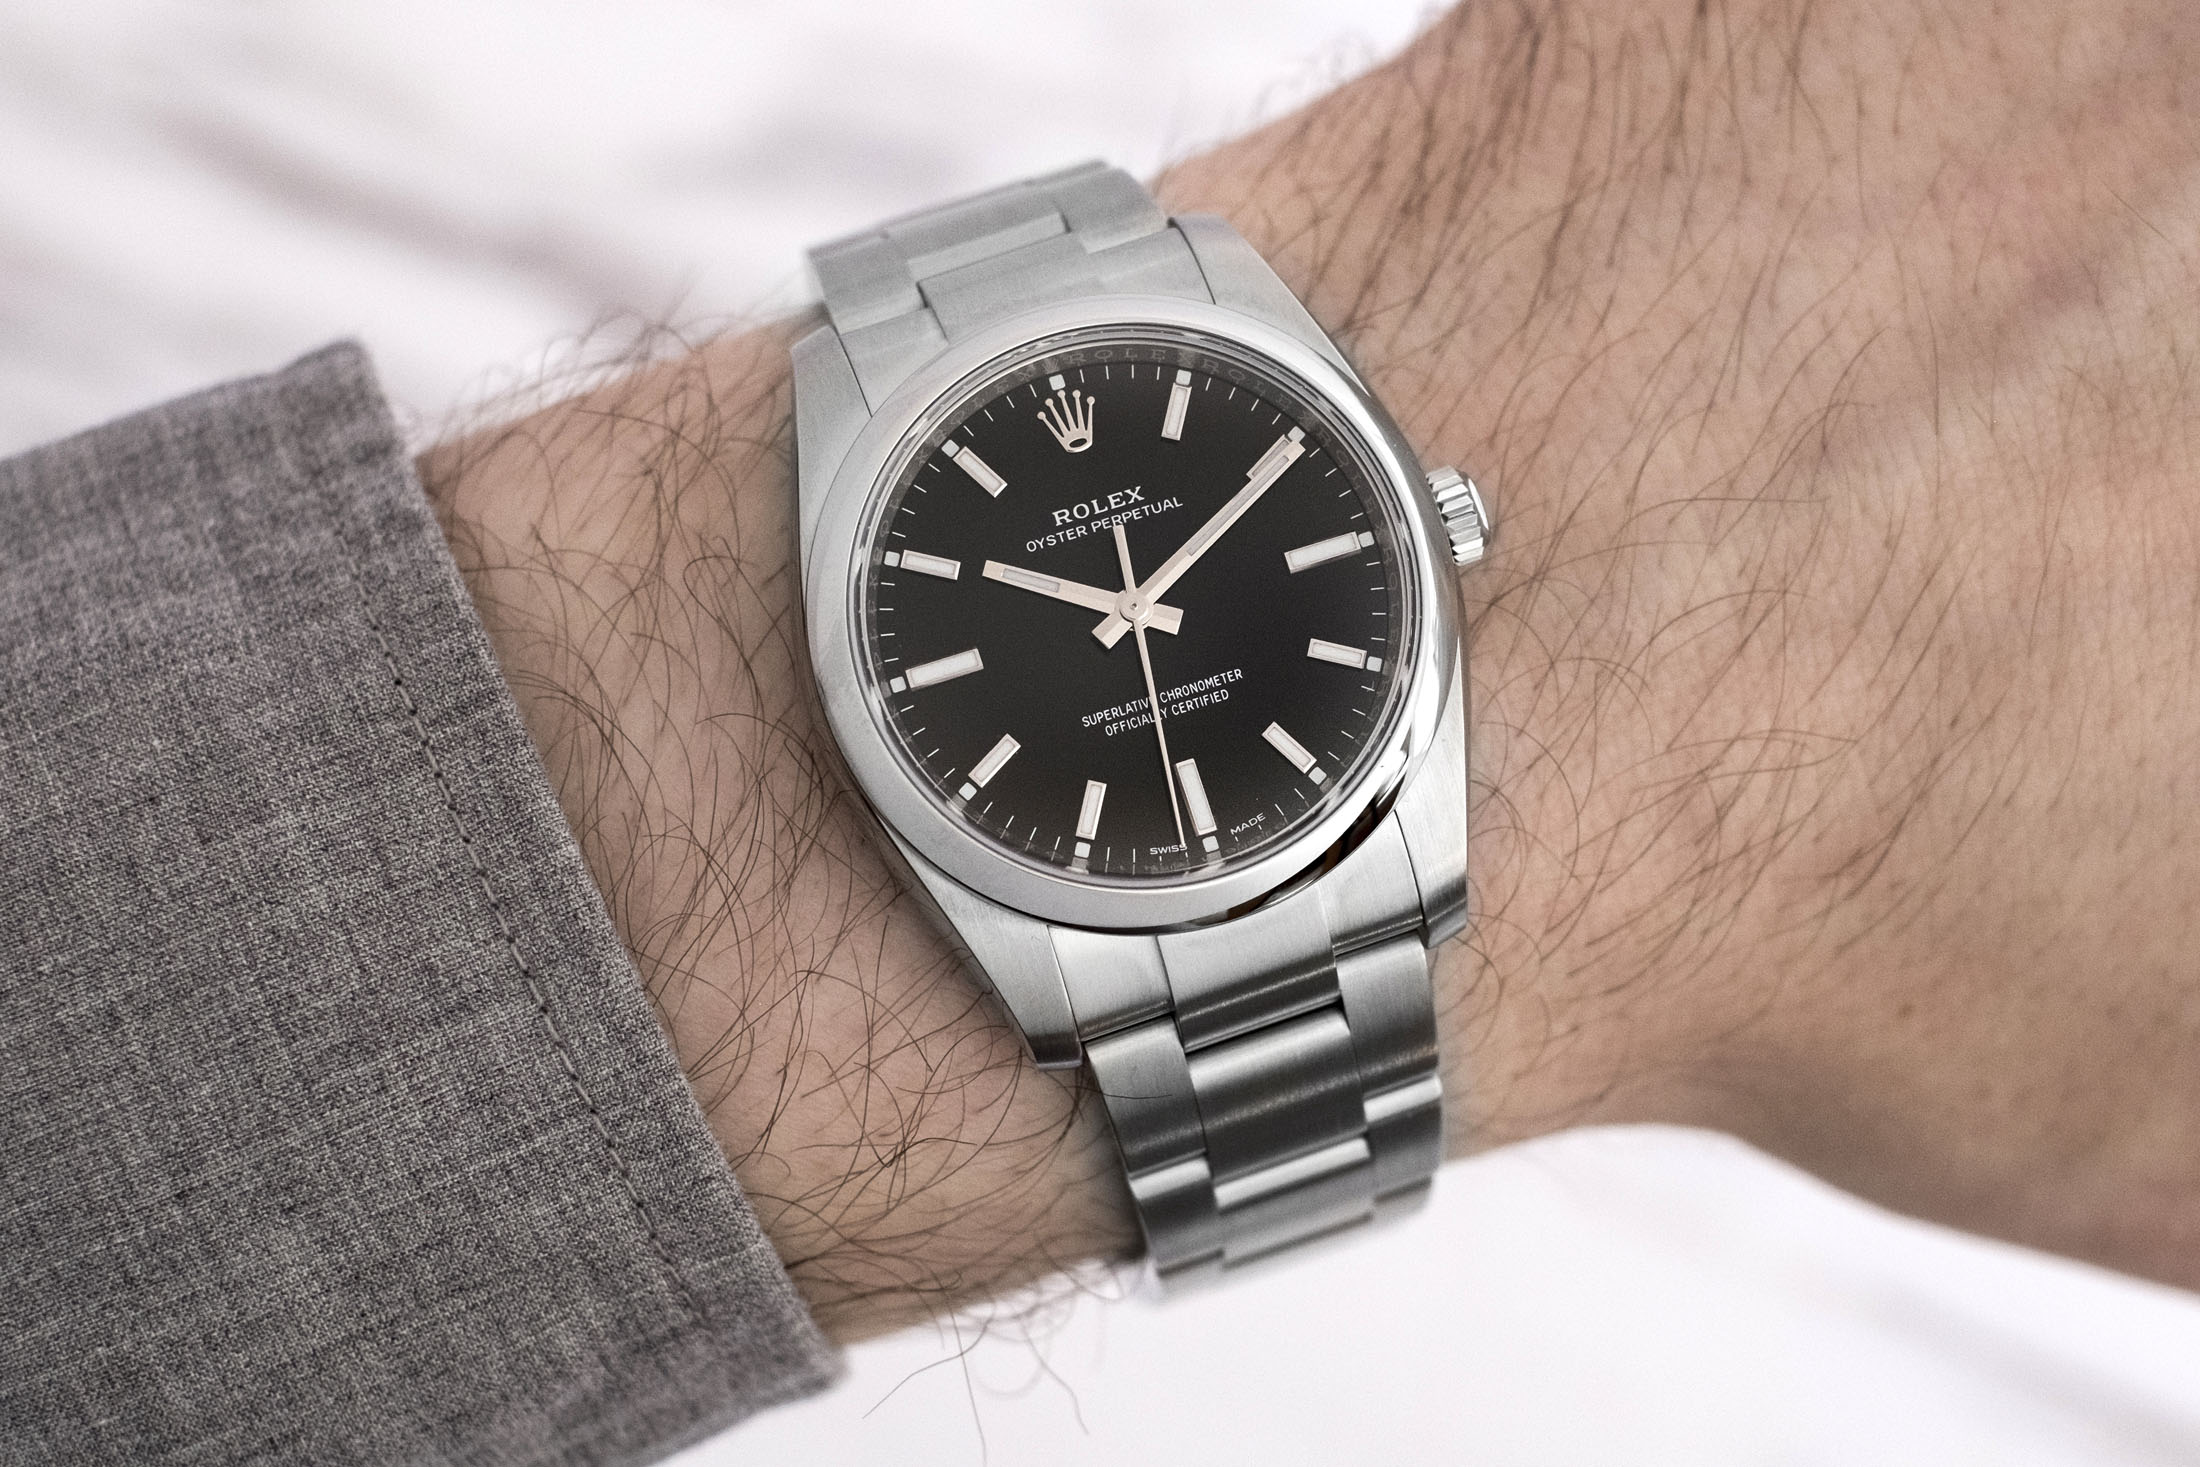 Hands-On: The Rolex Oyster Perpetual 